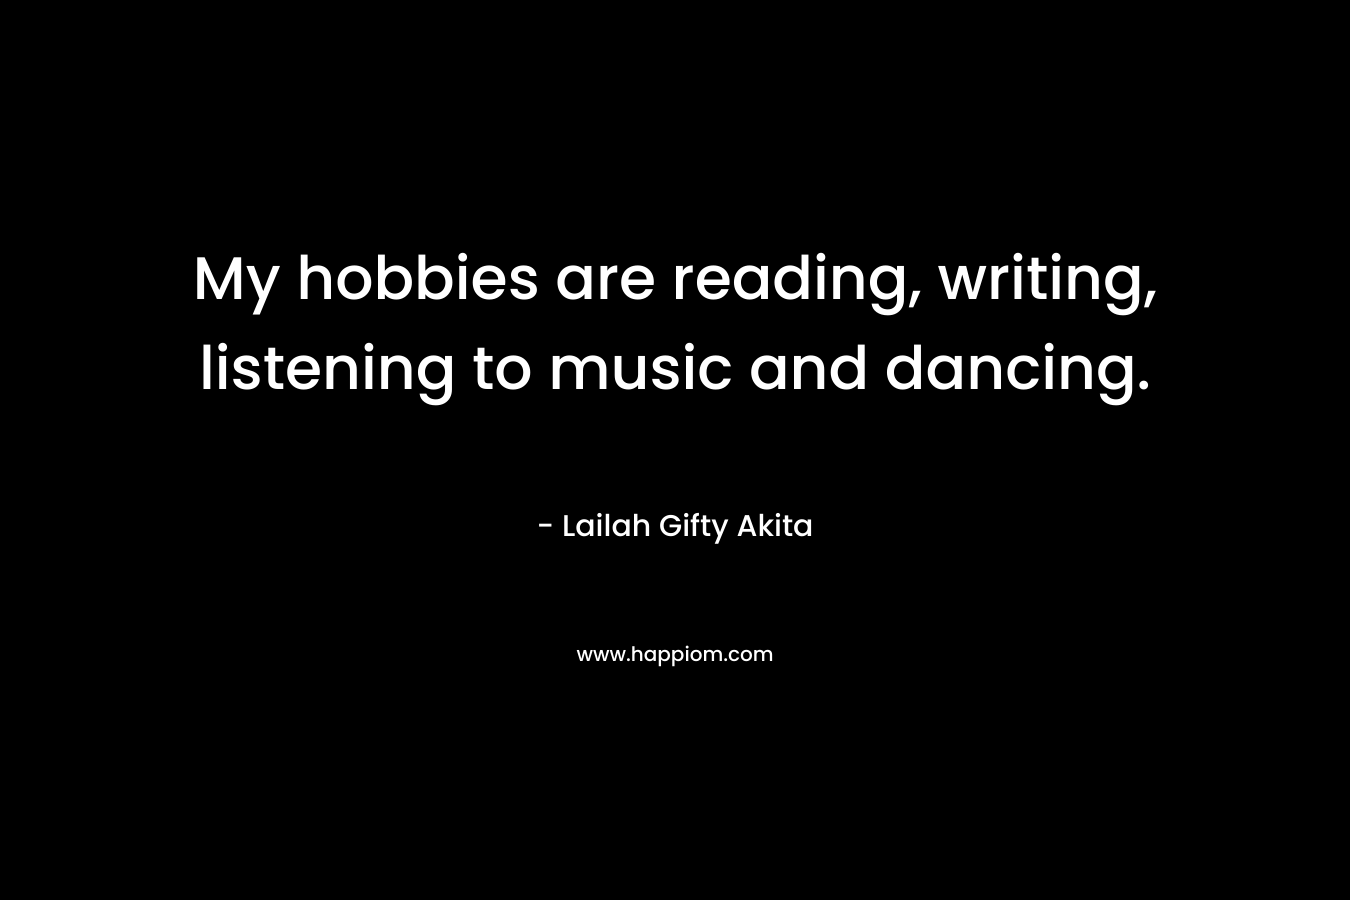 My hobbies are reading, writing, listening to music and dancing.